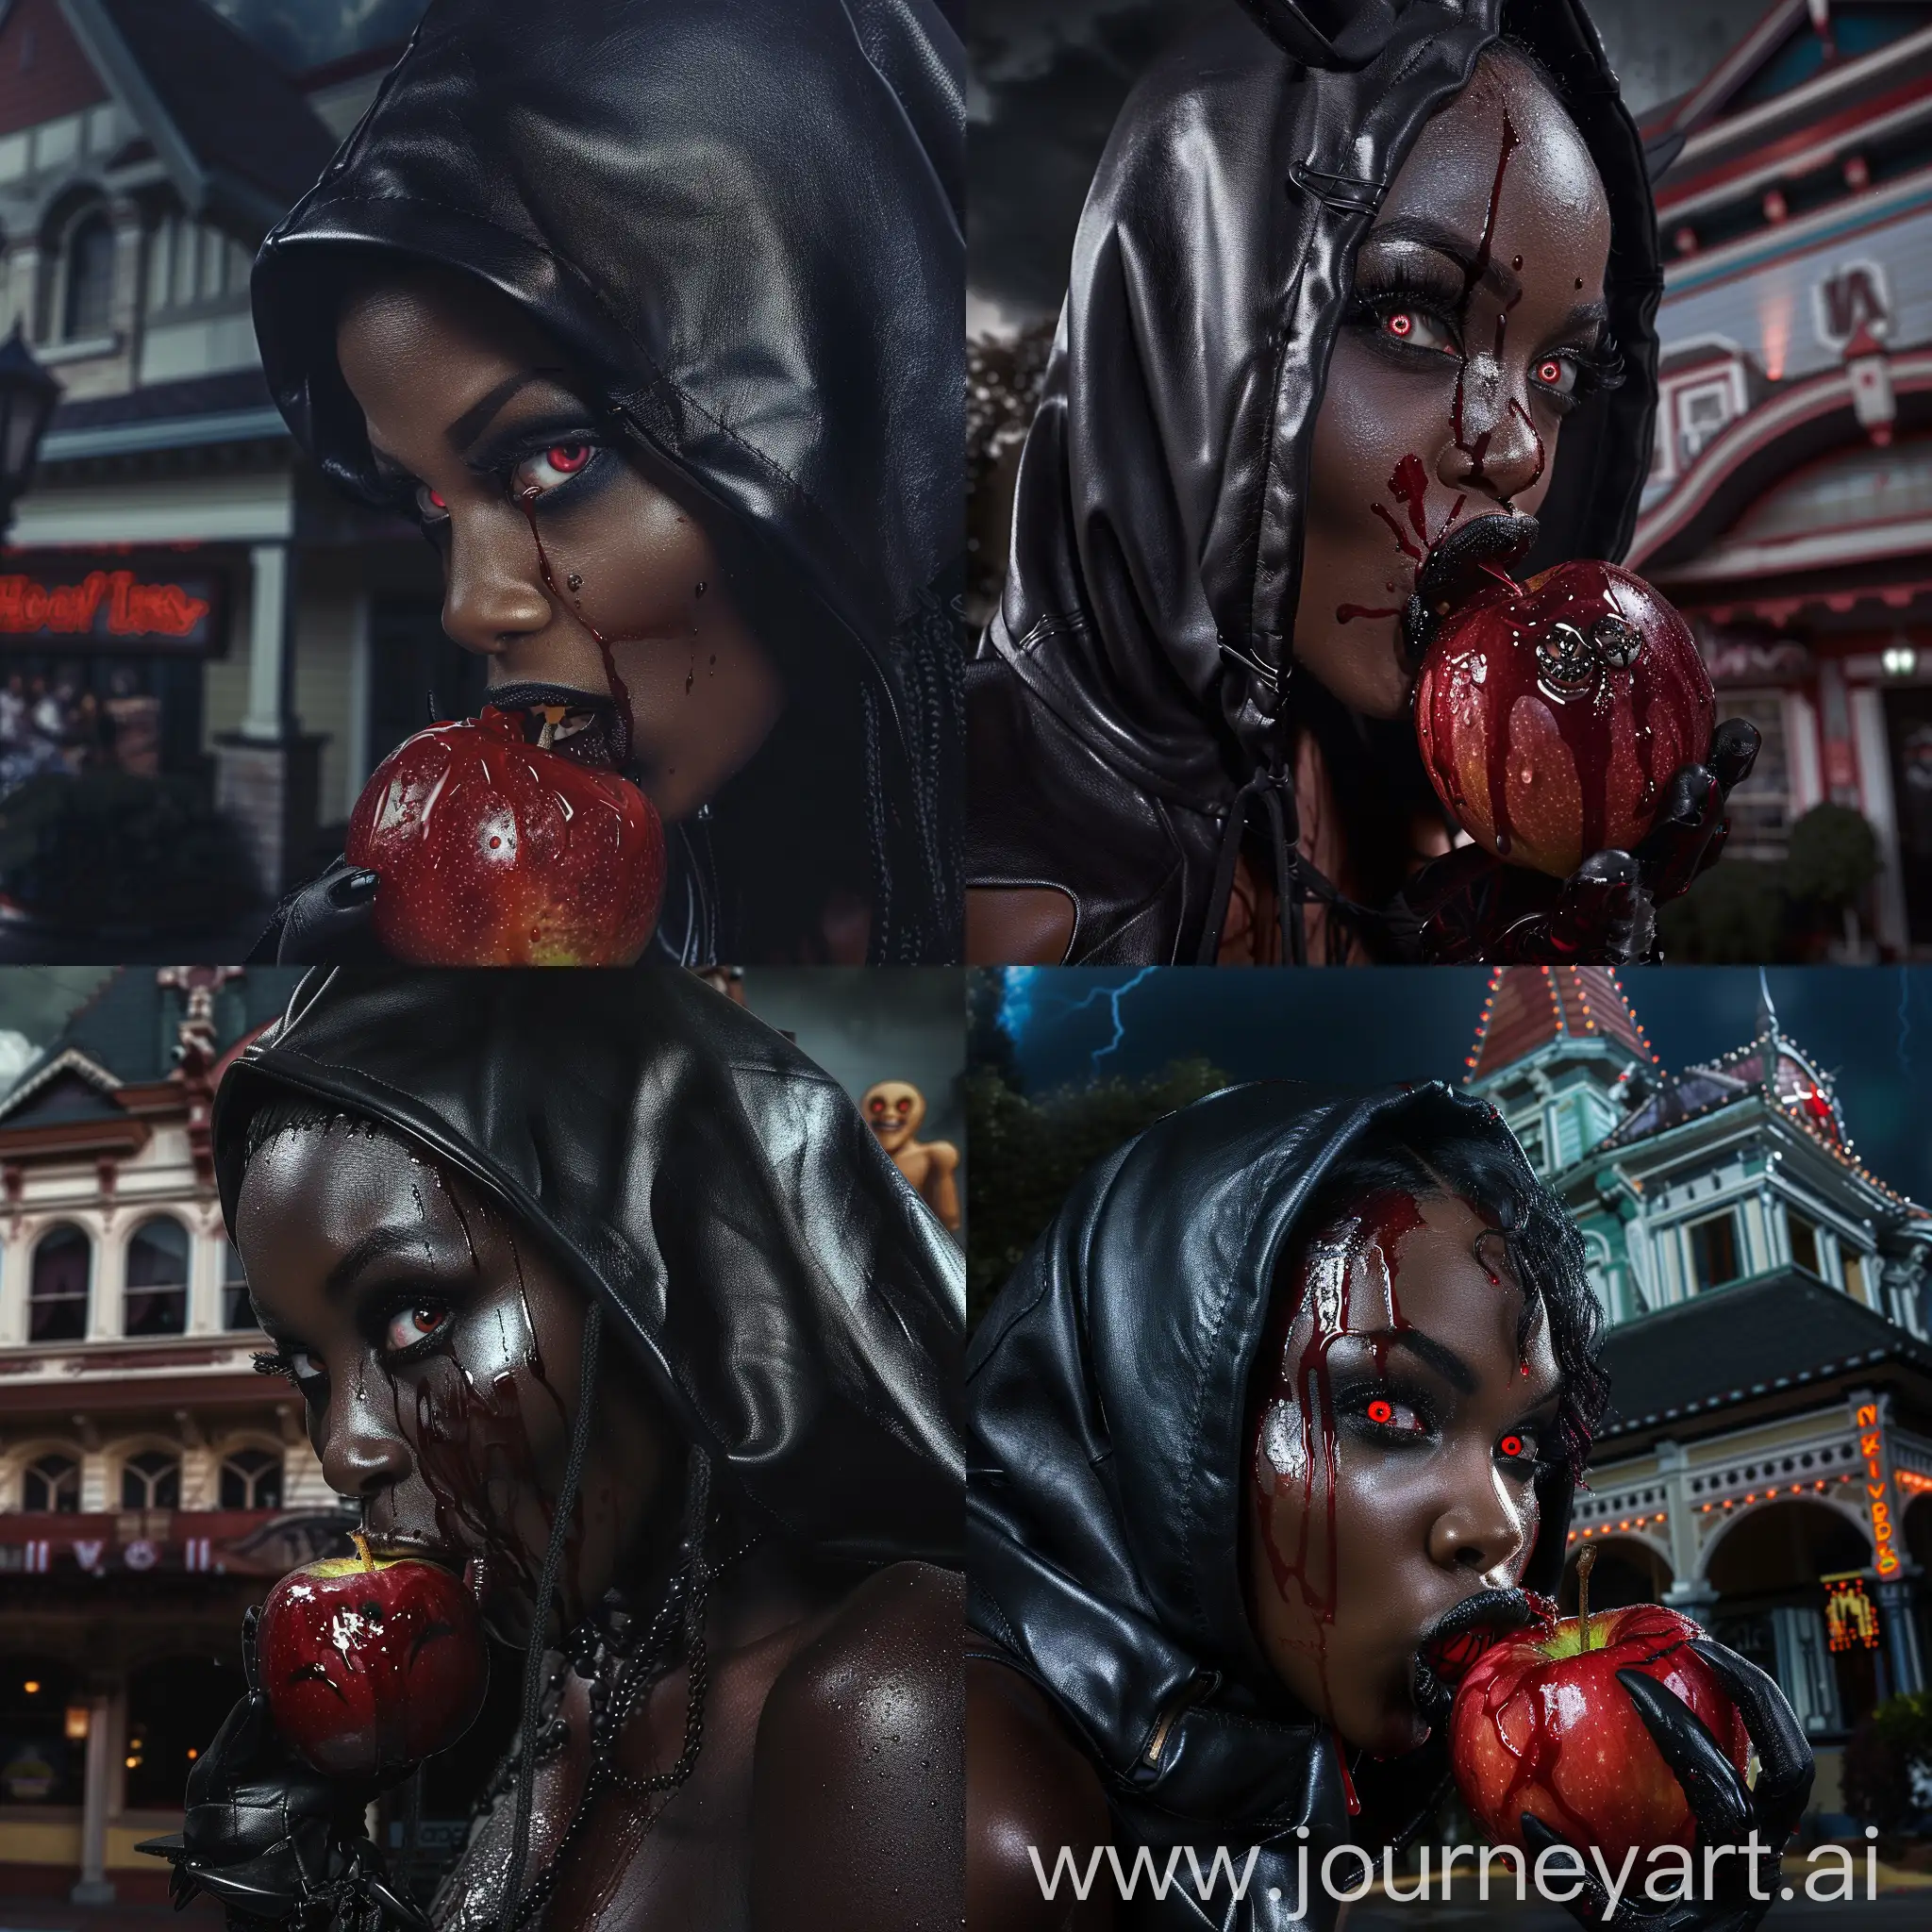 Sinister-Black-Woman-Bites-Bloody-Apple-Outside-Haunted-House